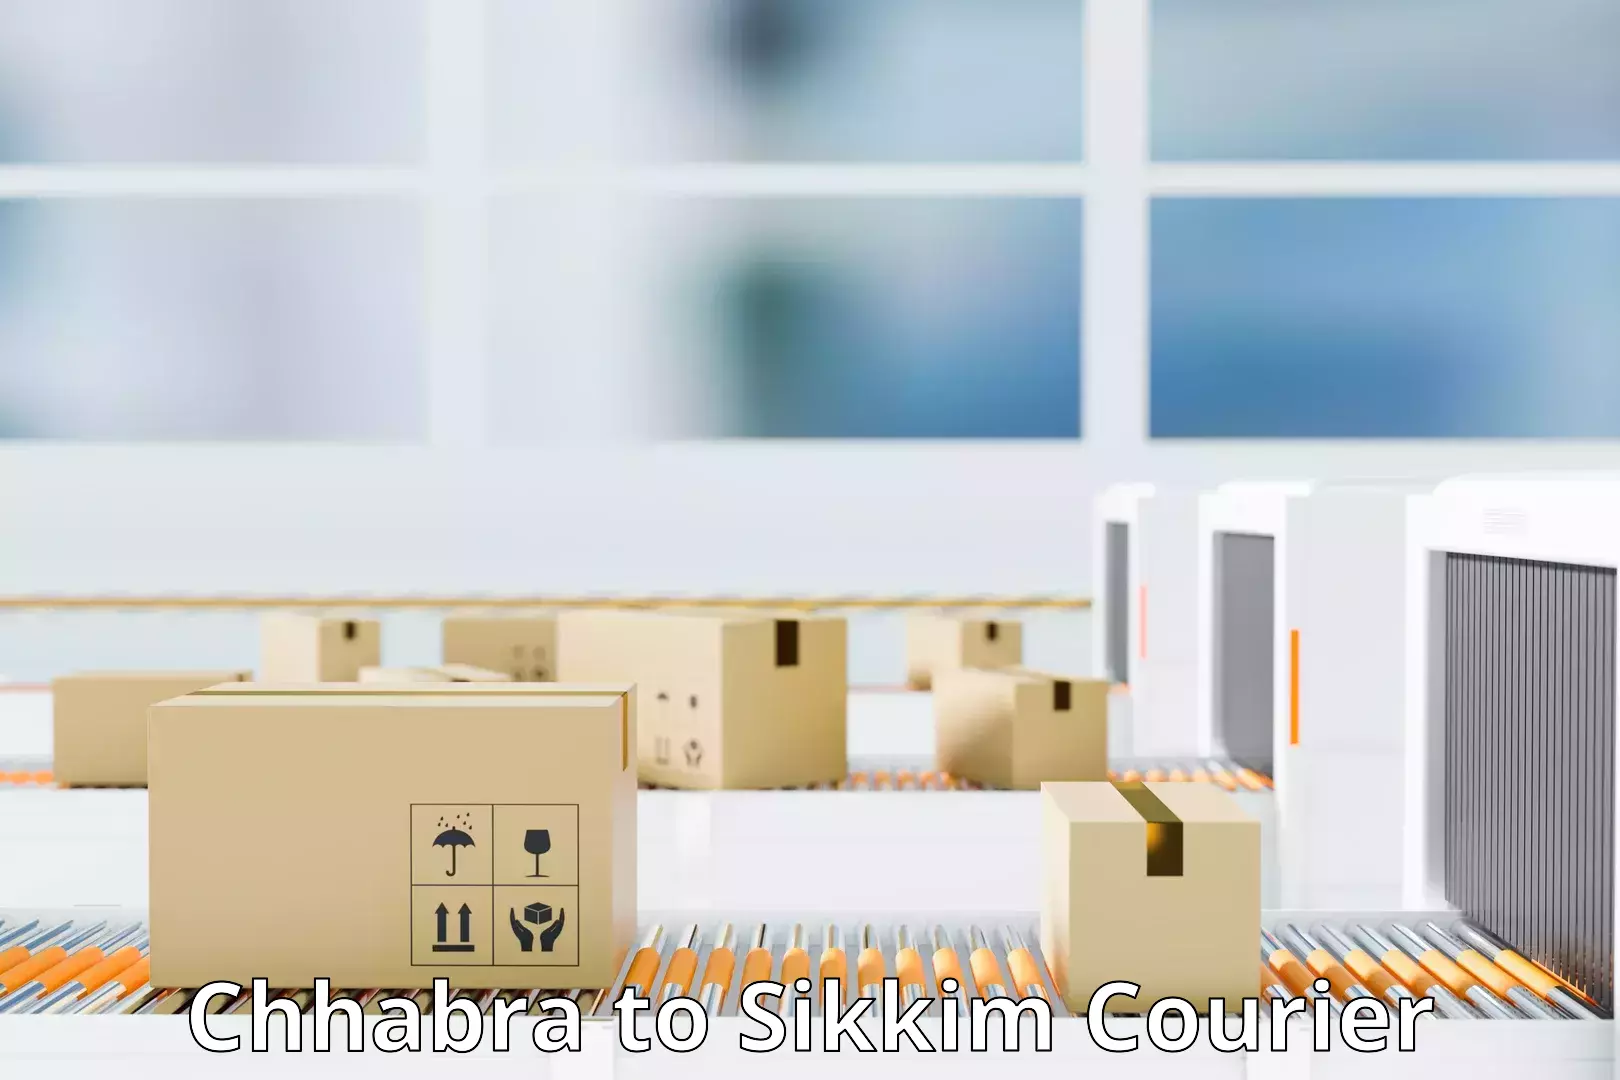 Global courier networks Chhabra to Sikkim